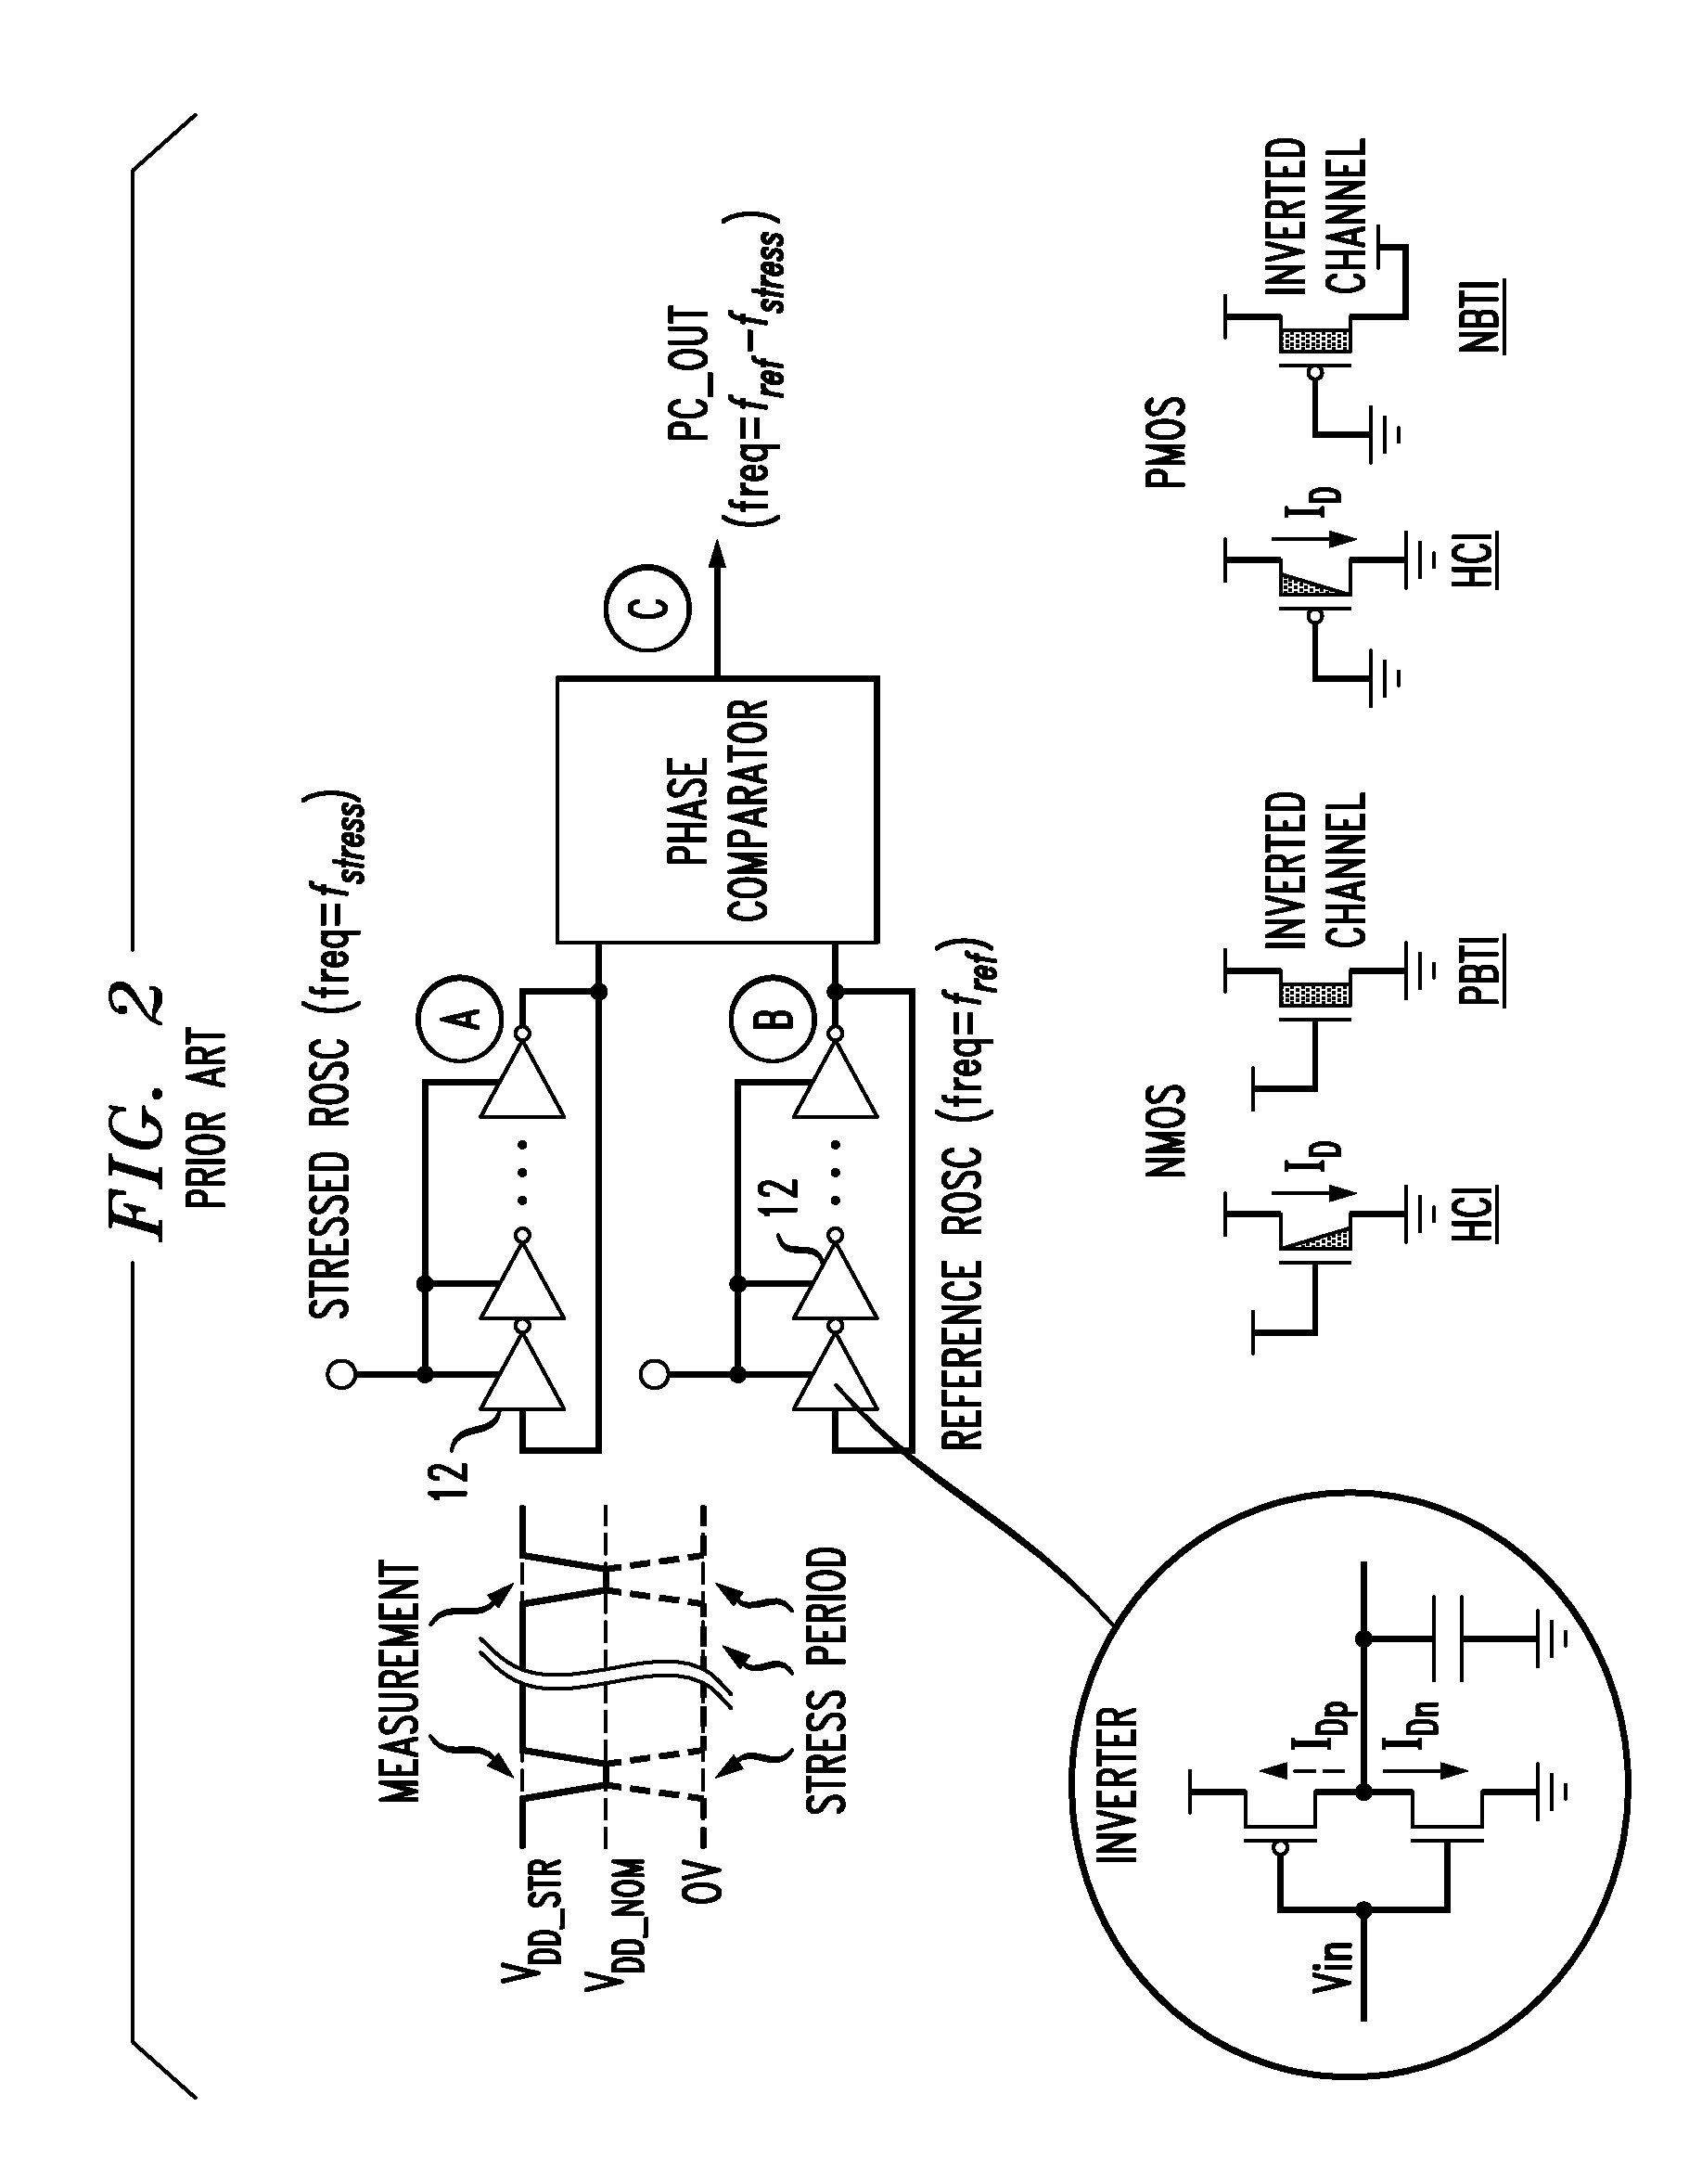 Apparatus and method for measuring degradation of CMOS VLSI elements